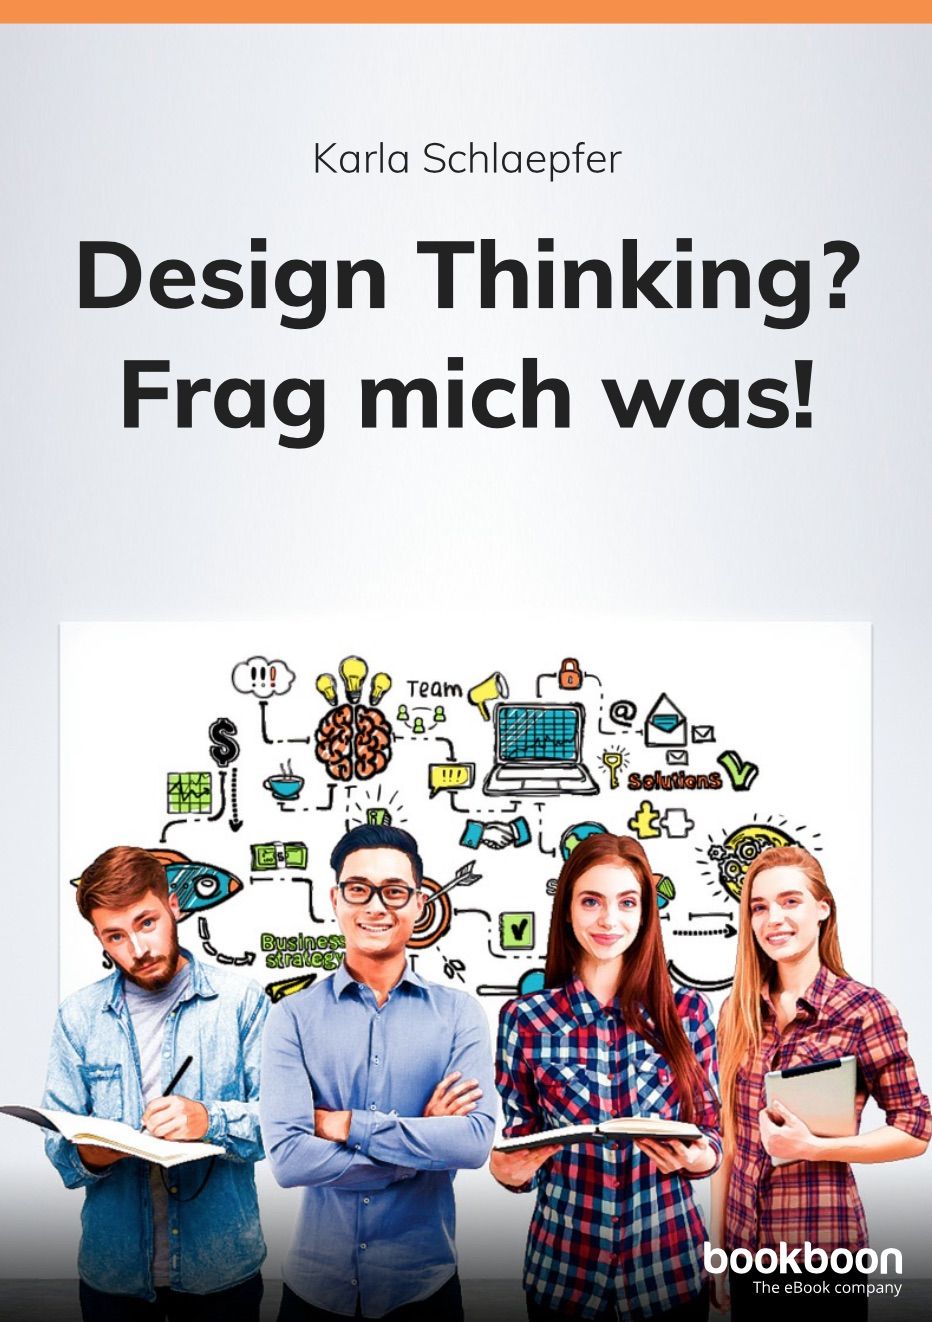 Book Cover of Karla’s Design Thinking Book showing a group of four standing in front of a wall with brainstorming symbols